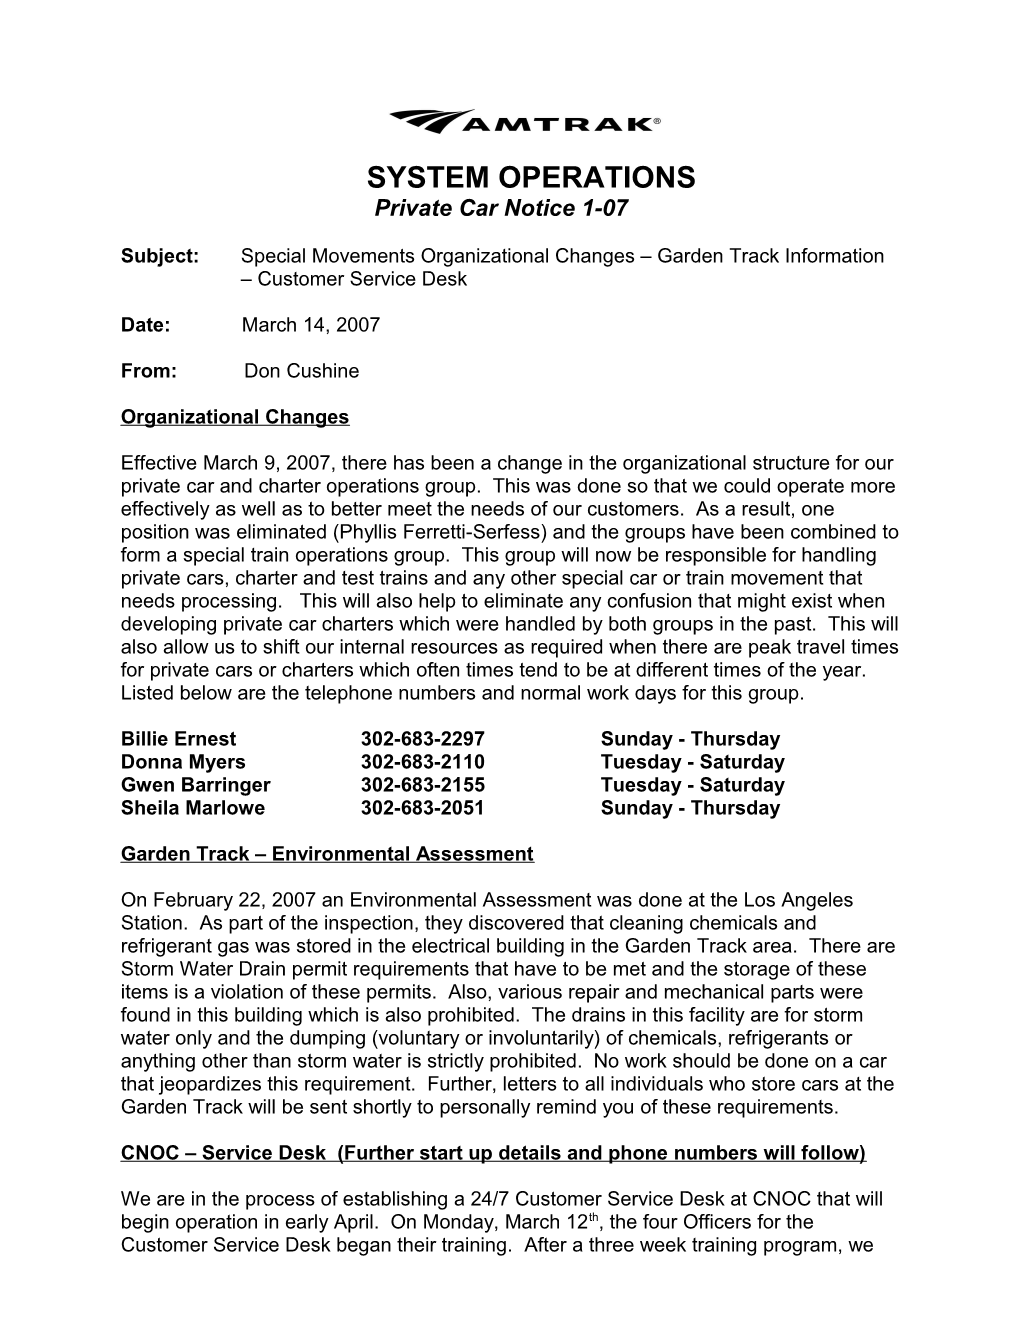 System Operations